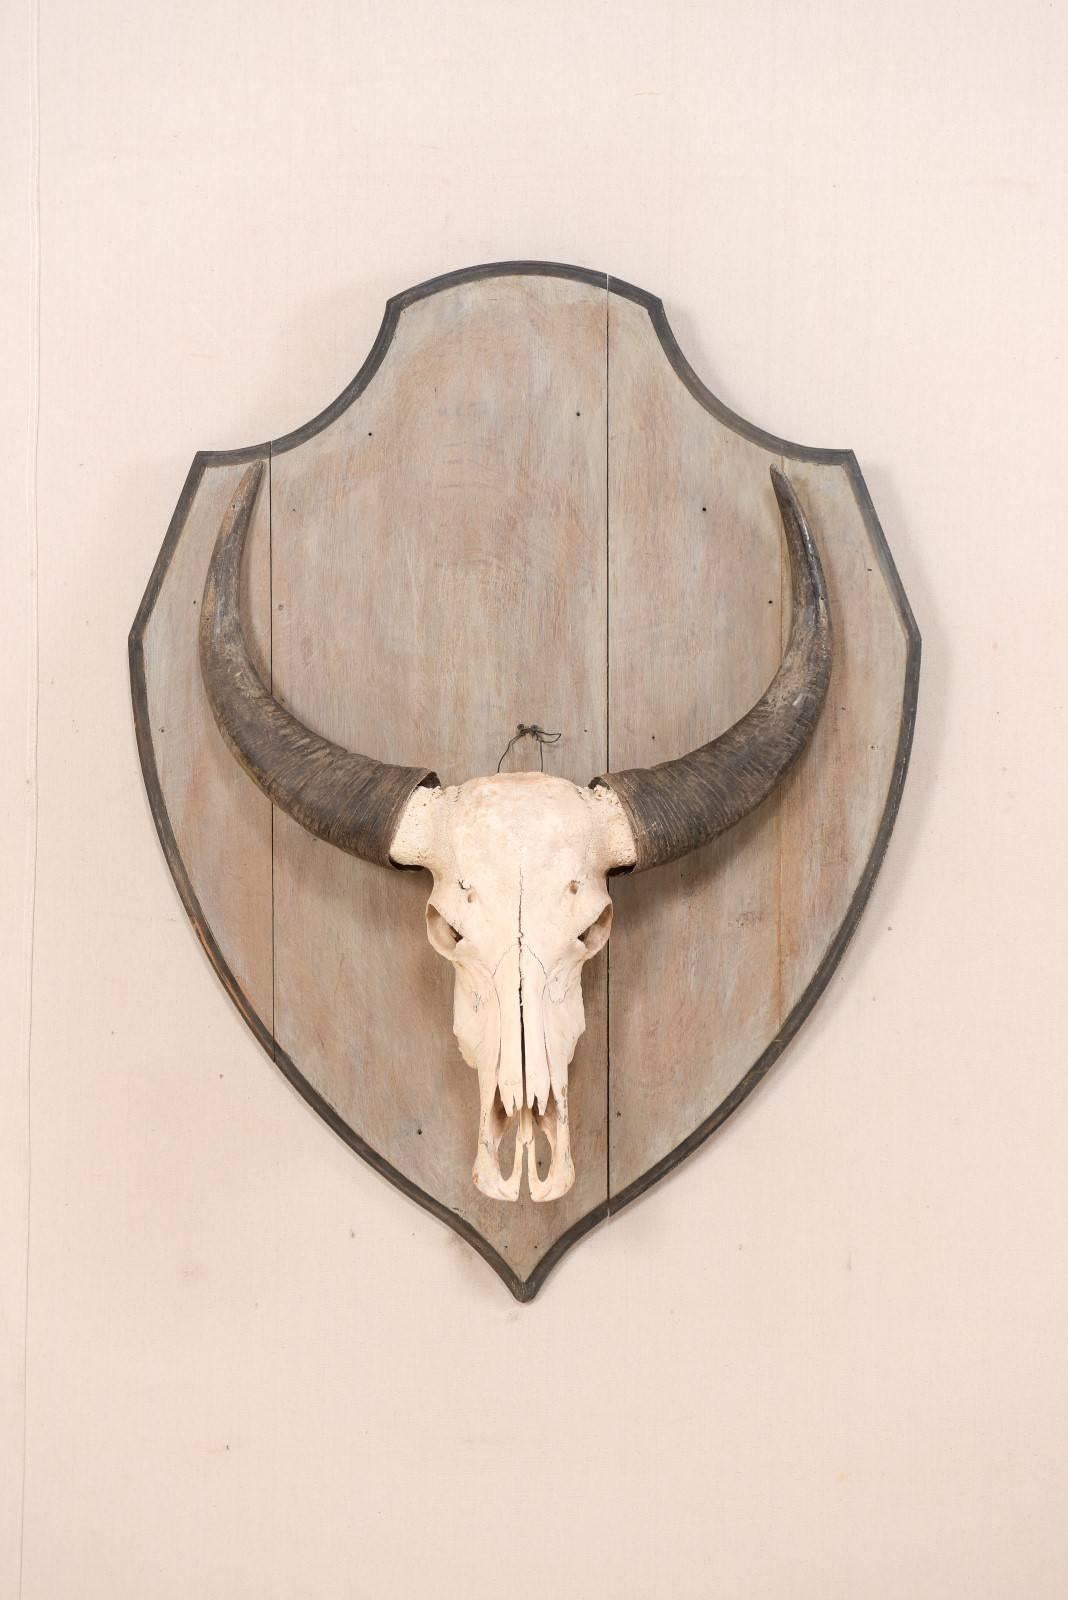 A vintage European painted wood wall plaque with water buffalo skull. This unique item consists of a vintage European shapely, shield-shaped wooden plaque, which has been adorn with an impressive horned water buffalo skull. The wooden plaque is grey